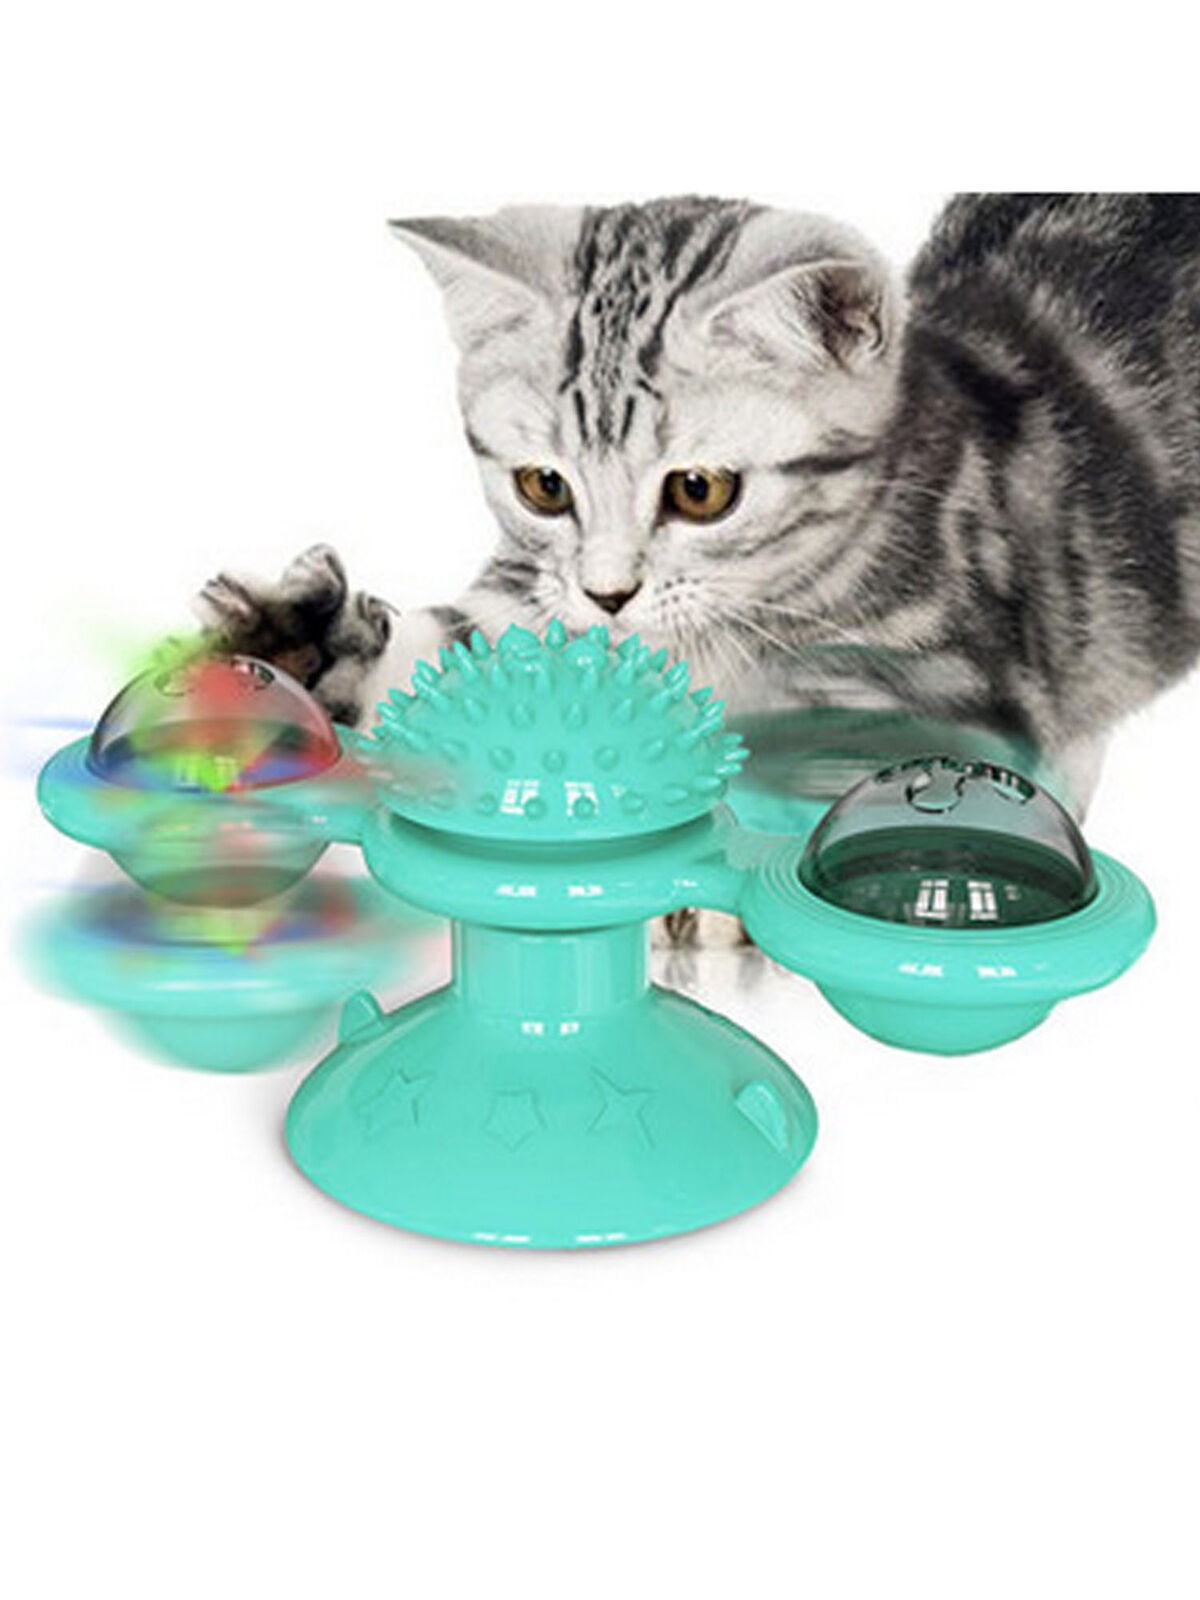 SUNSIOM Funny Cat Turning Windmill Toy Turntable Tickle Scratch Hair